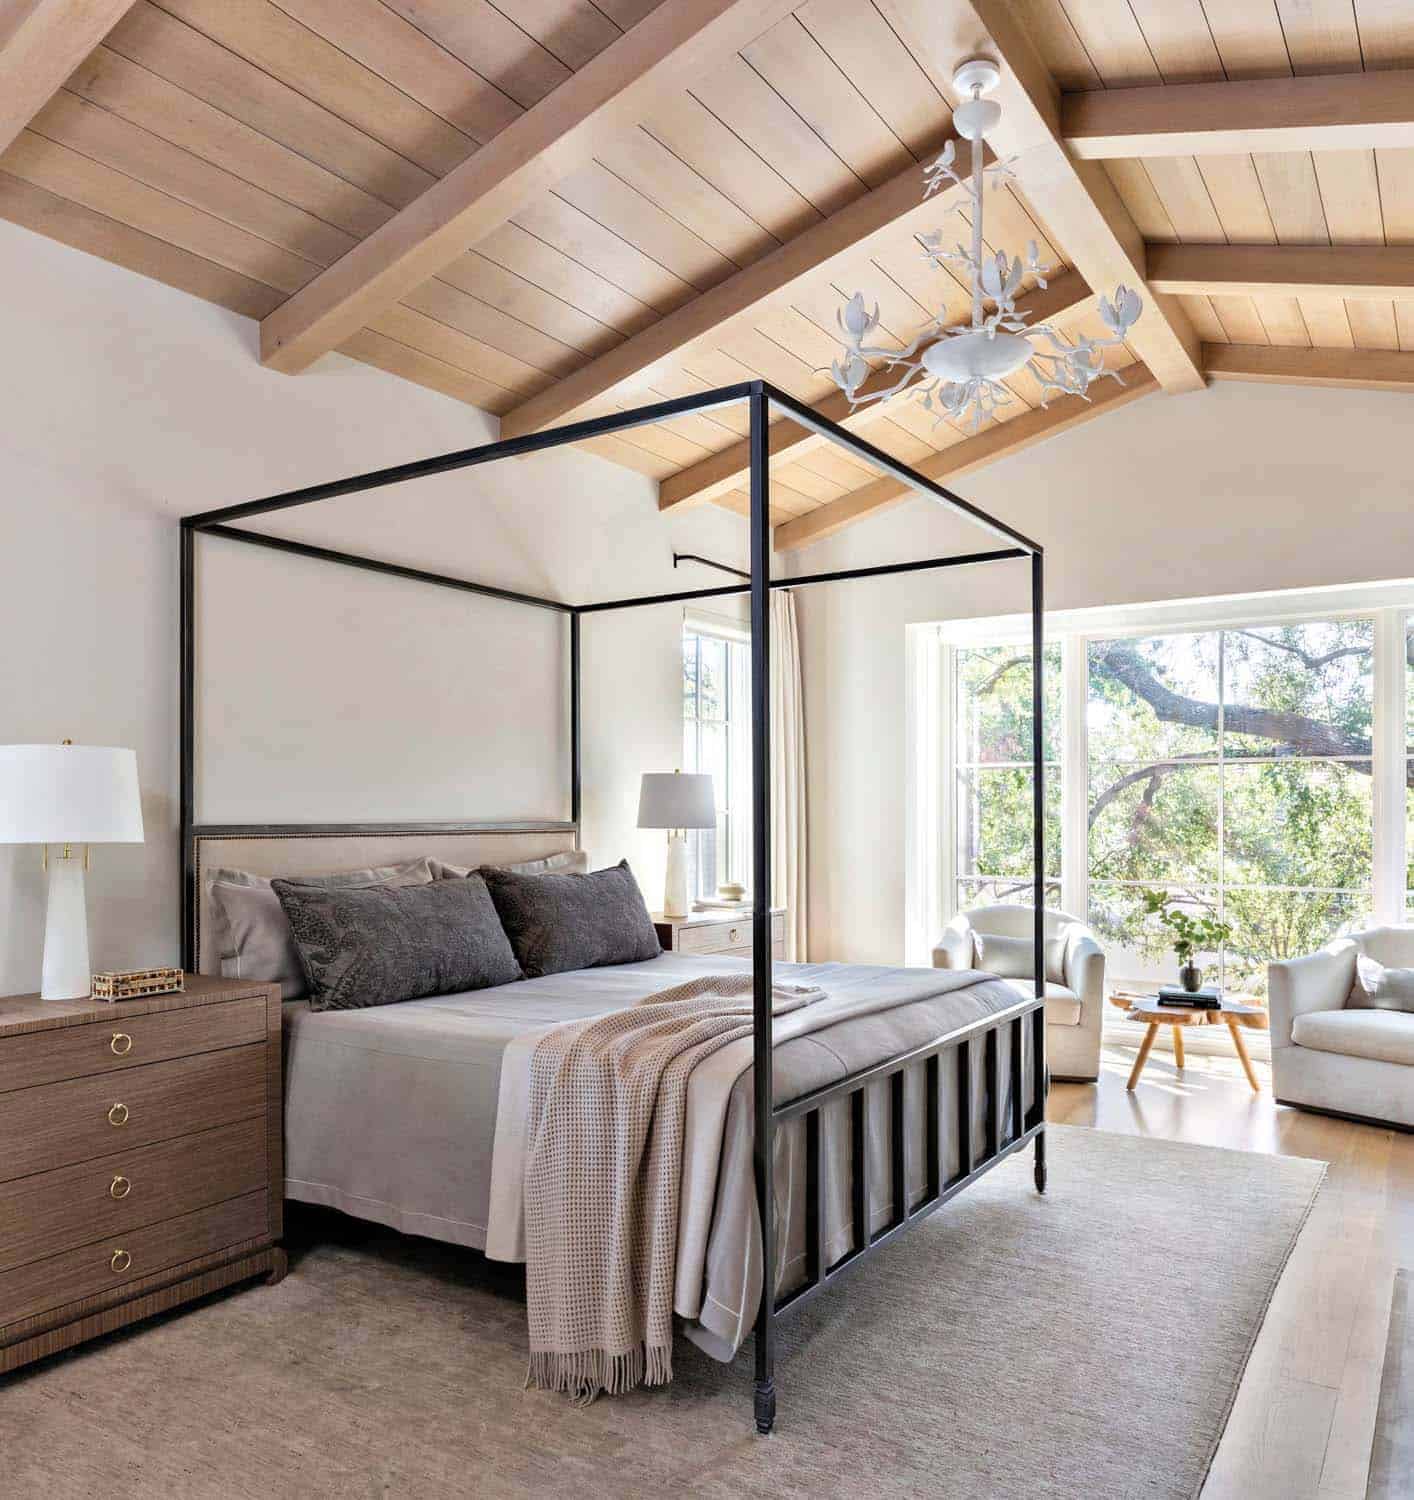 French provincial style bedroom with a wood ceiling